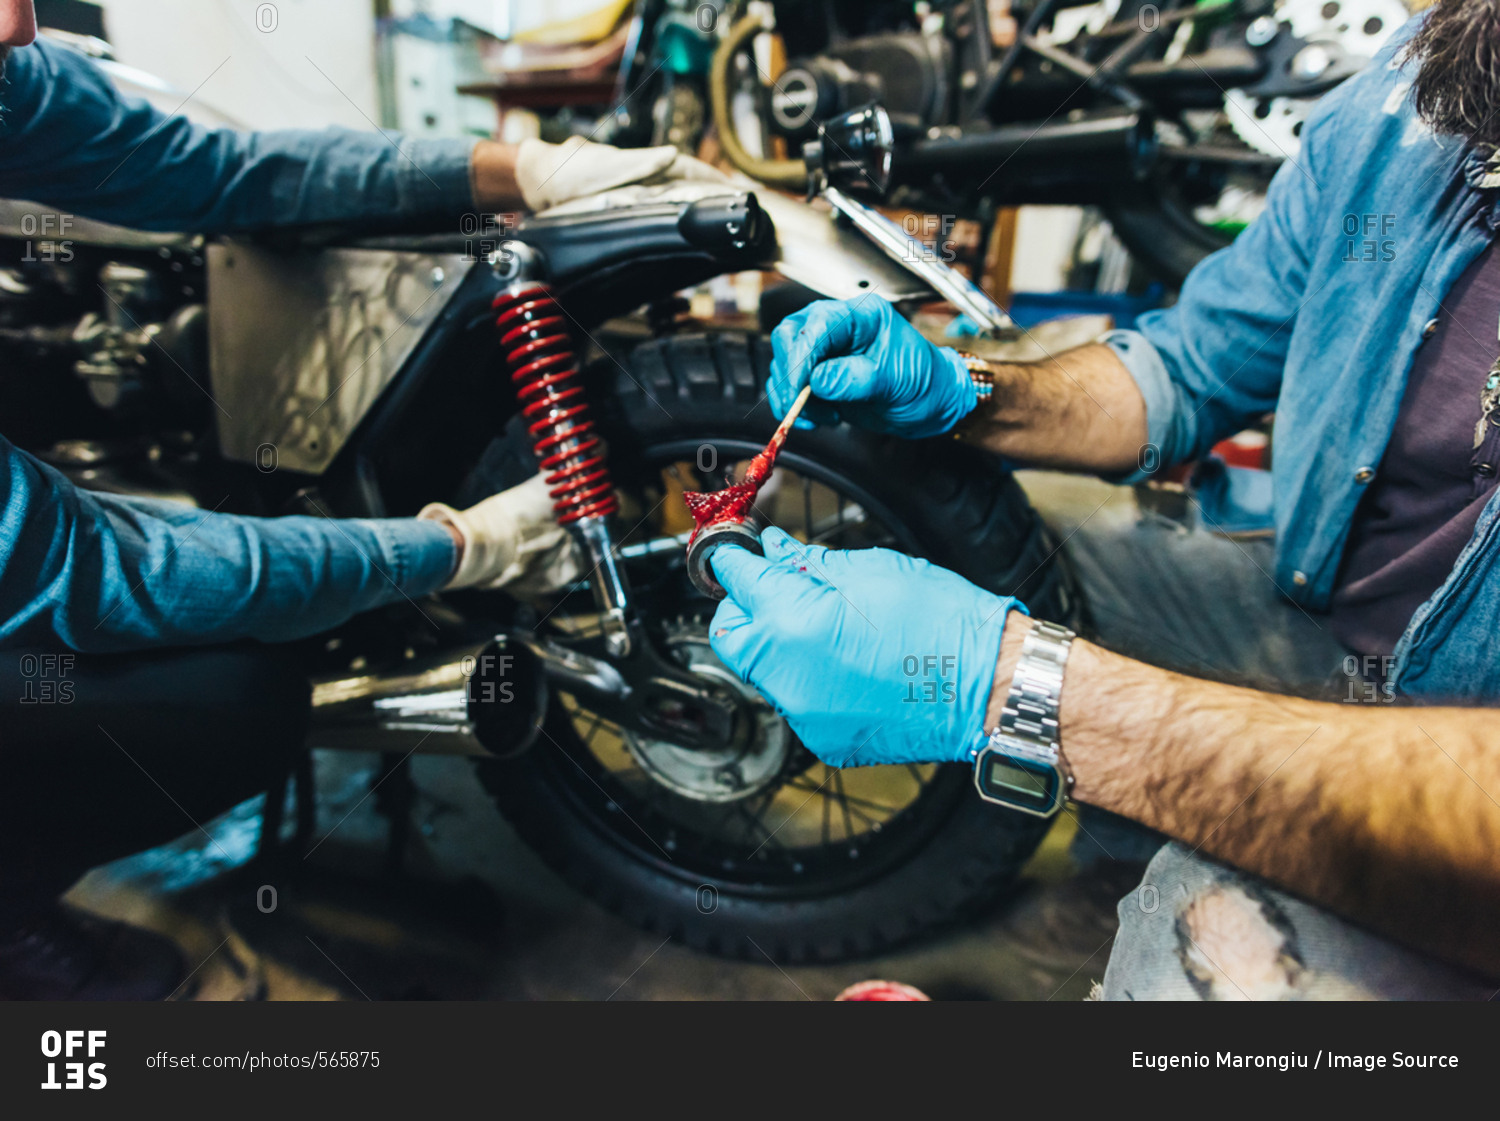 Two mature men, working on motorcycle in garage, close-up